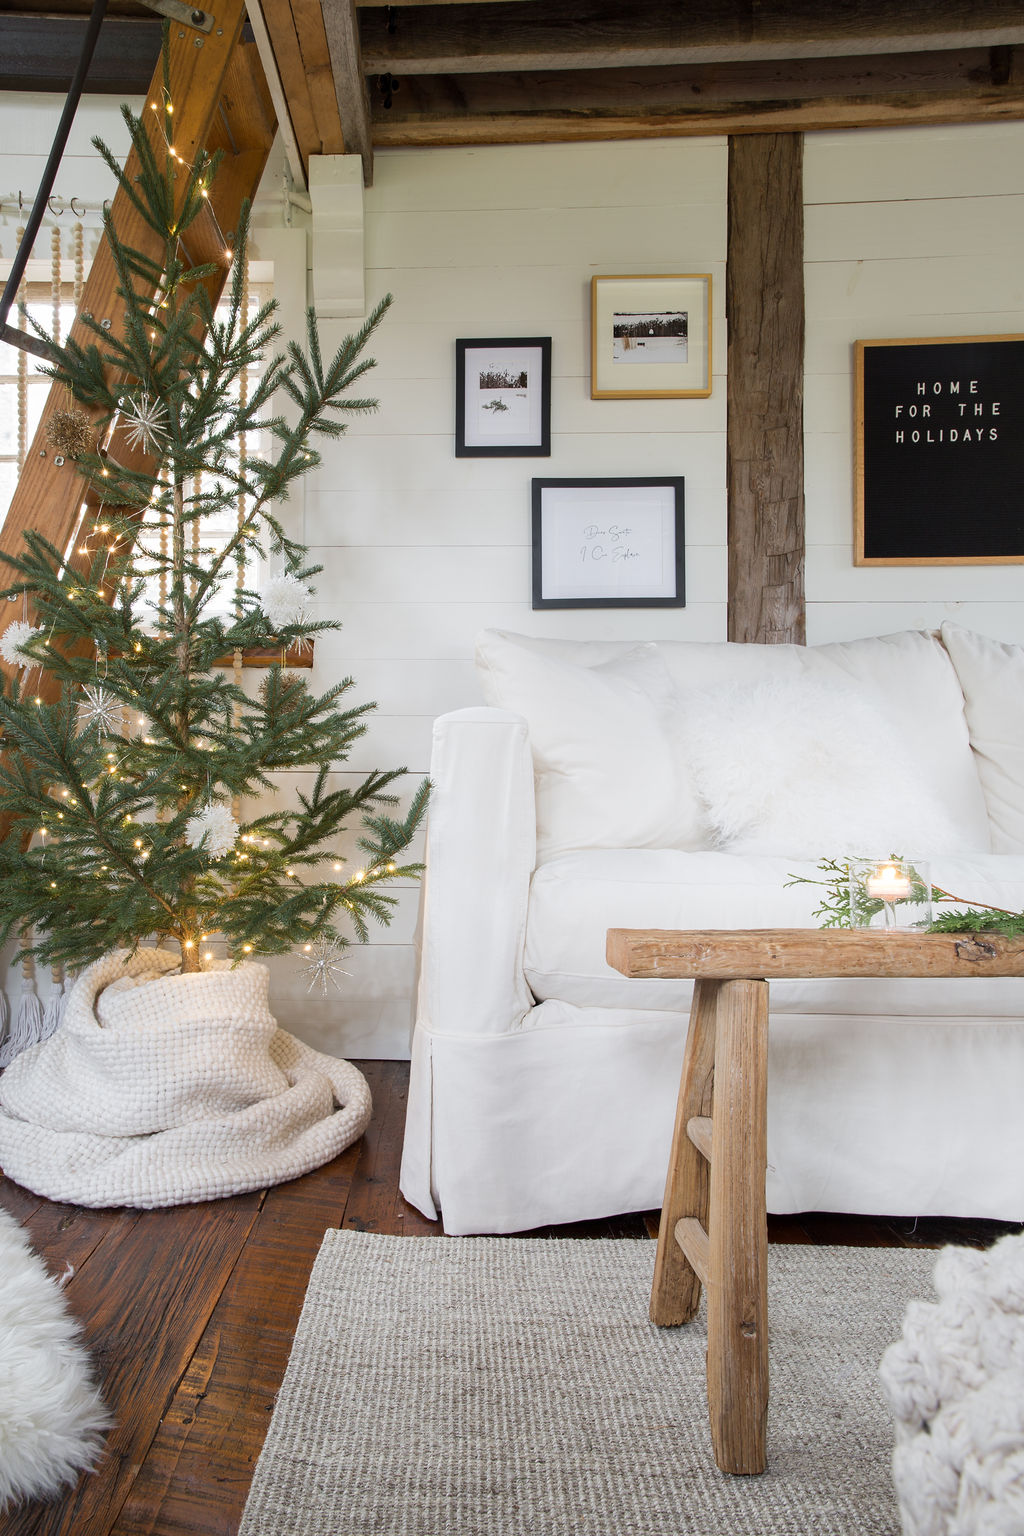 Shop holiday decor in the Treehouse